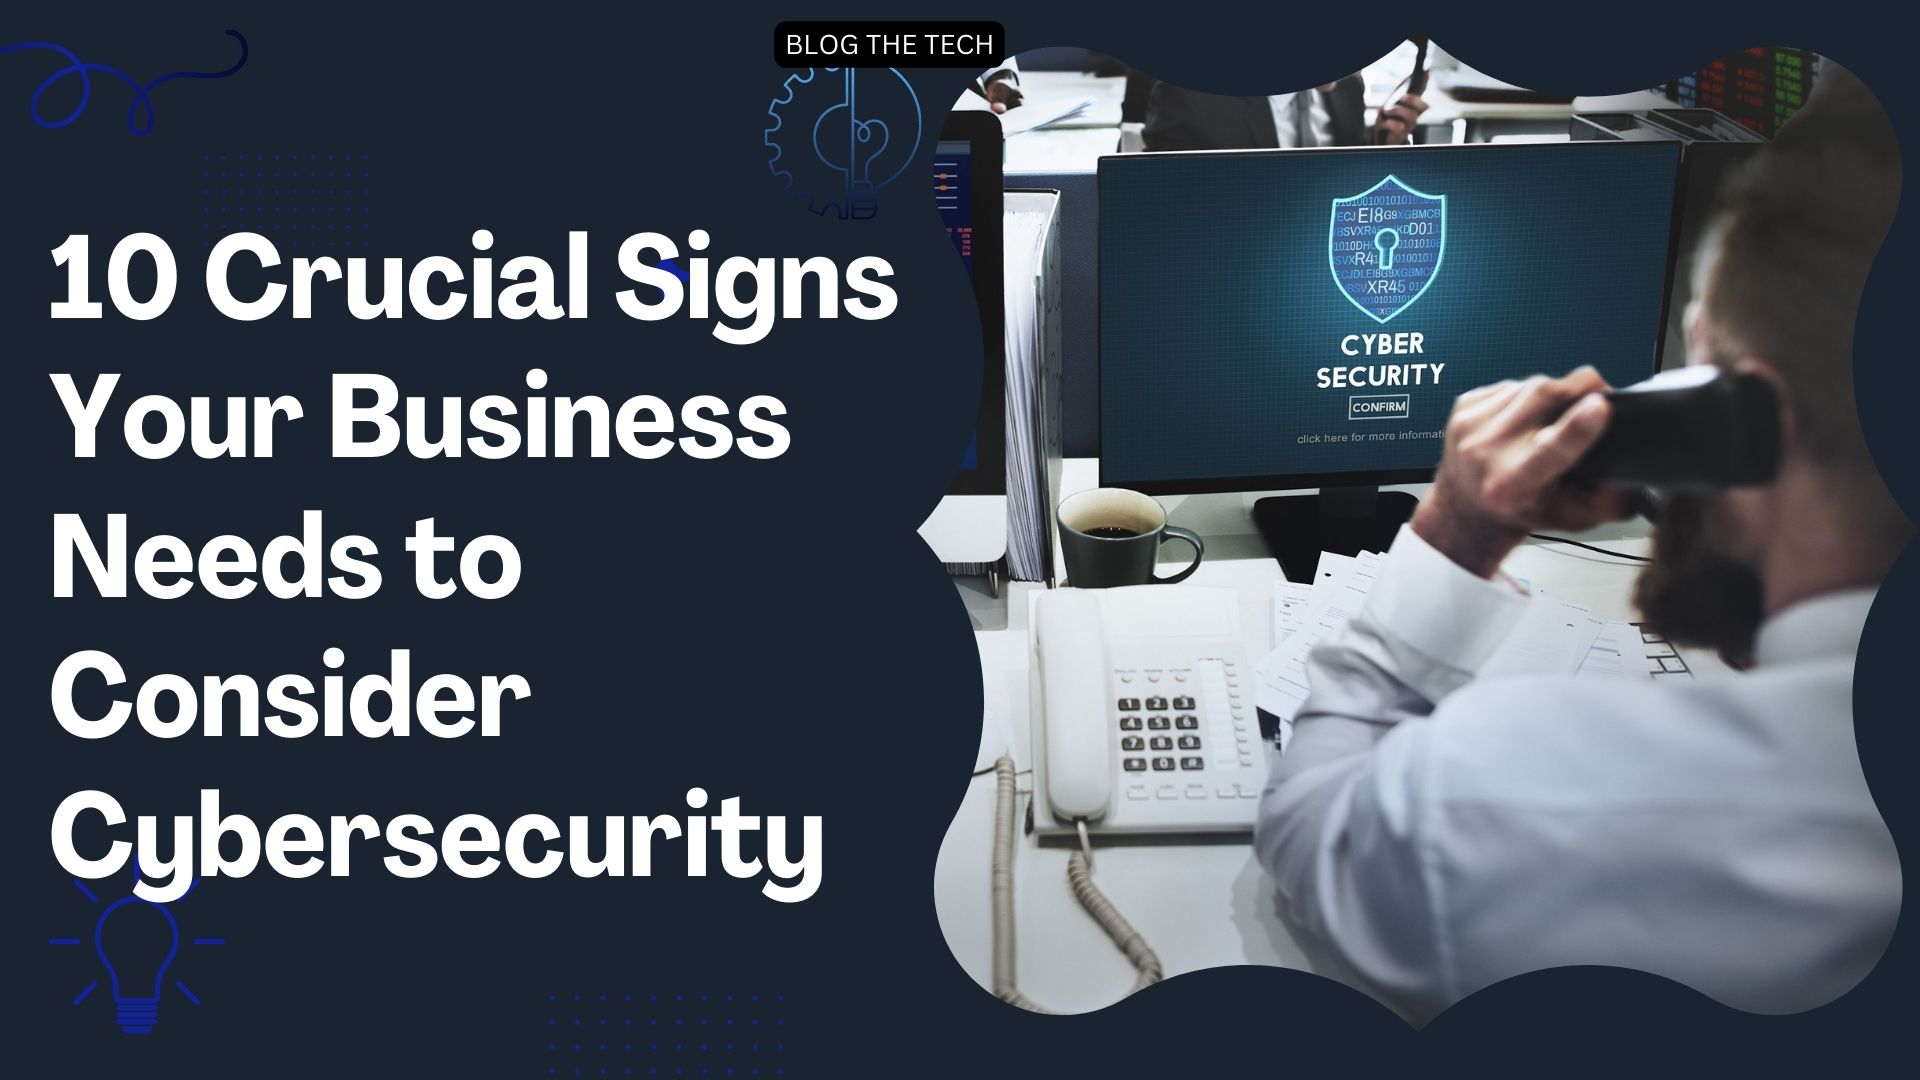 Crucial Signs Your Business Needs to Consider Cybersecurity